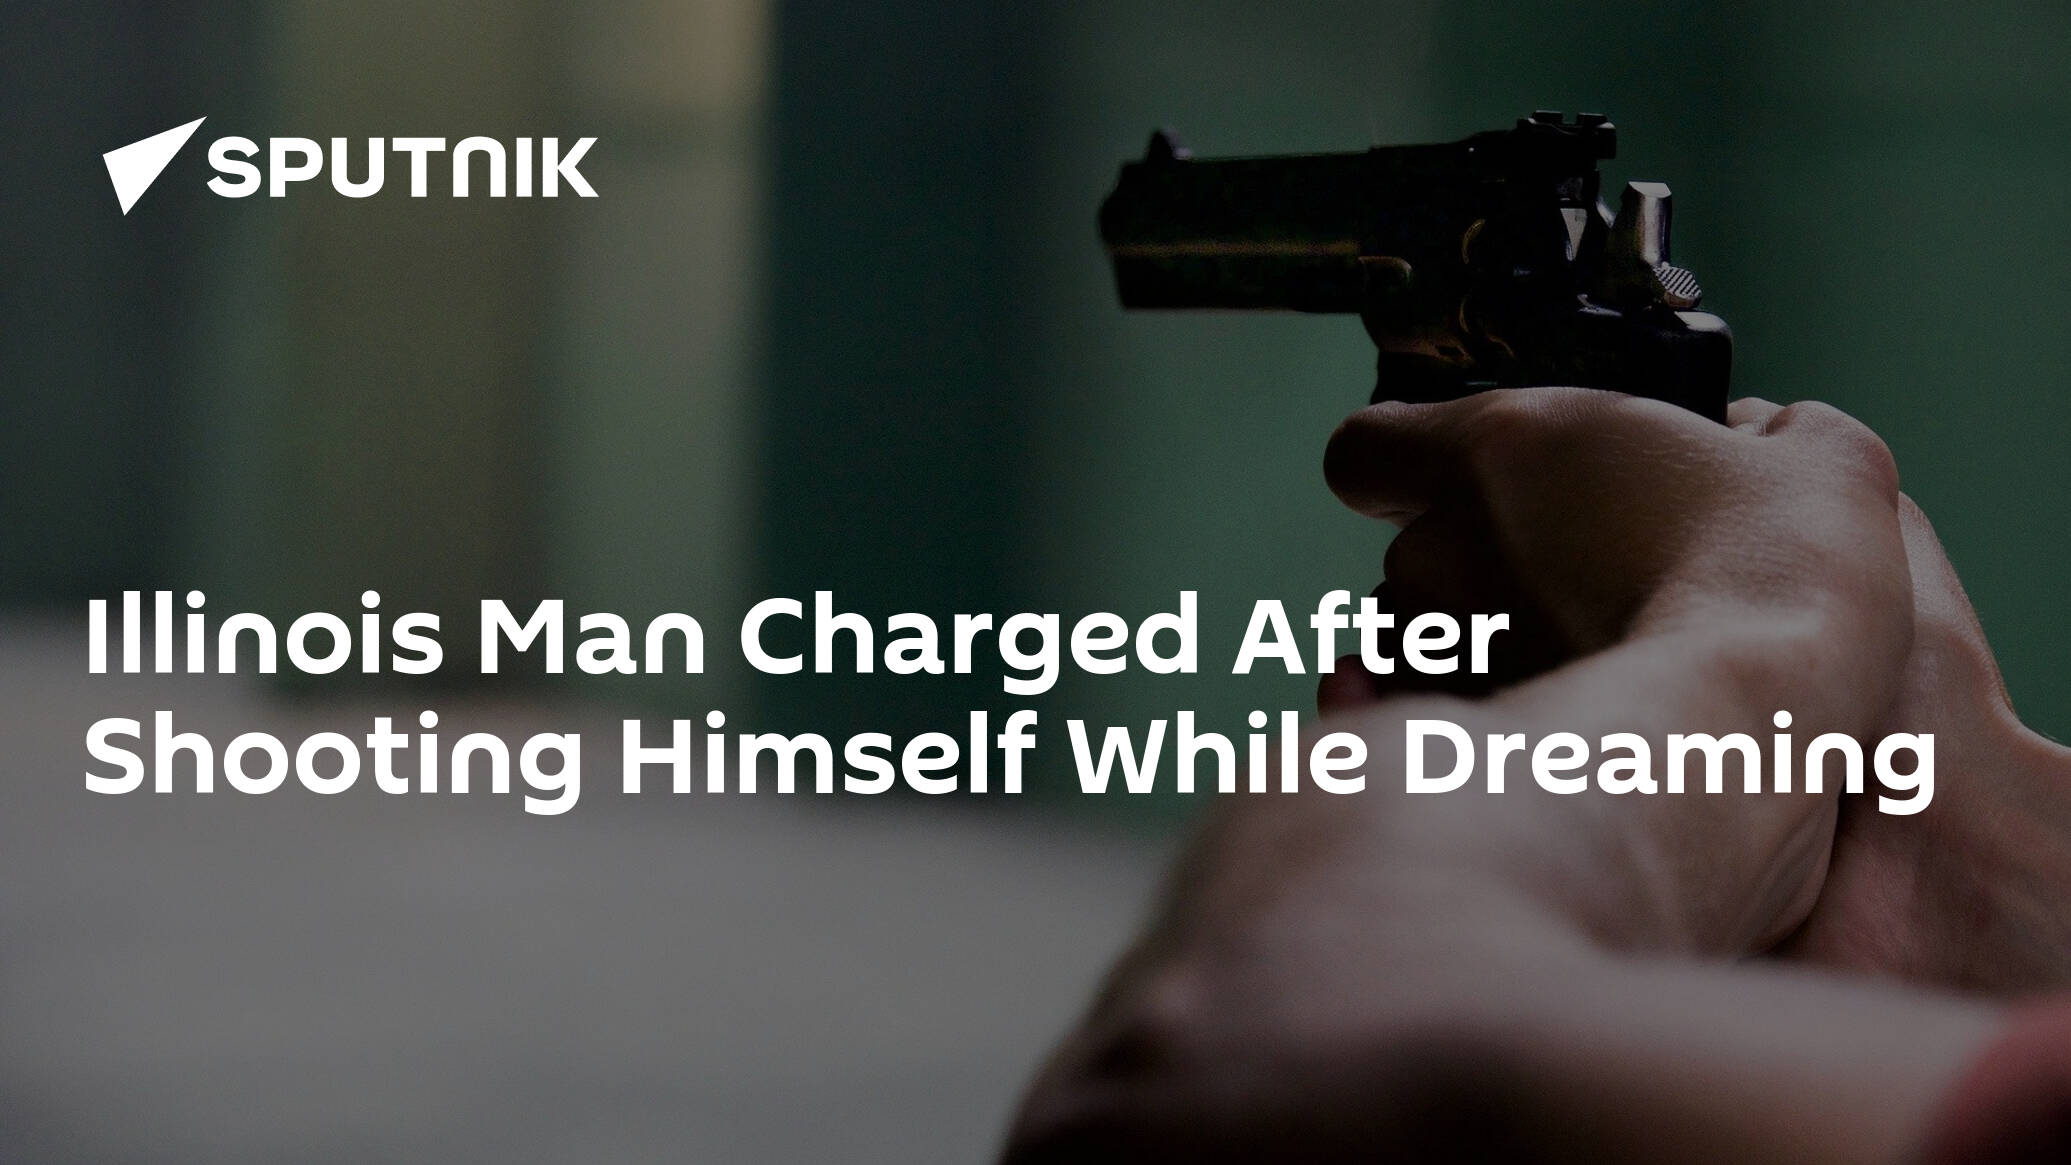 Illinois Man Charged After Shooting Himself While Dreaming